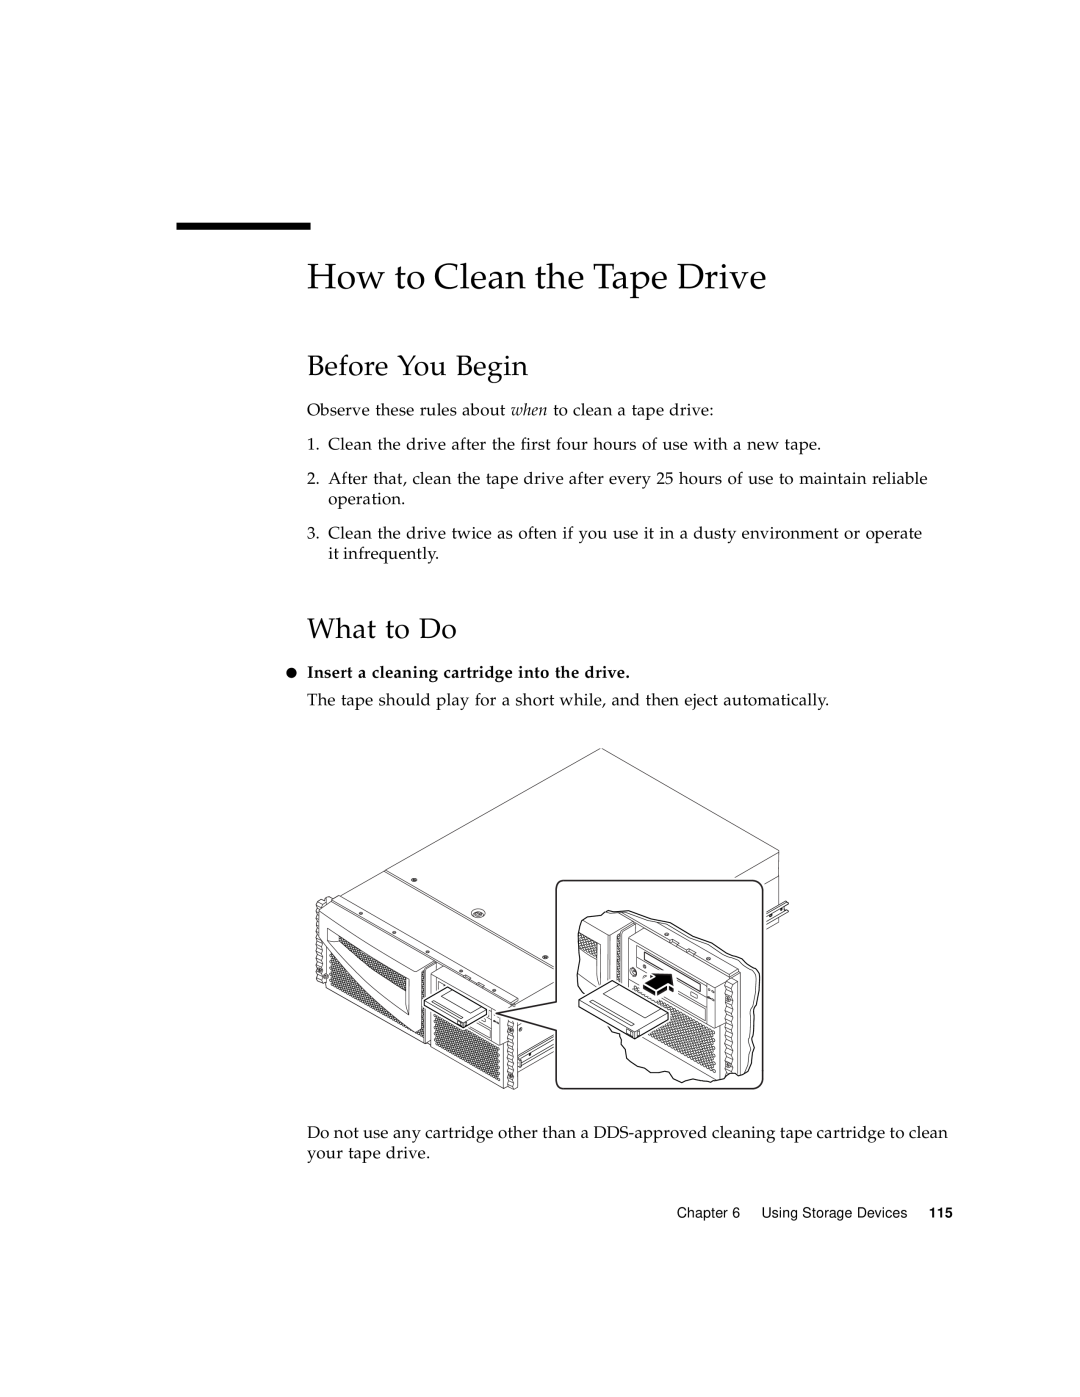 Sun Microsystems 220R manual How to Clean the Tape Drive, Insert a cleaning cartridge into the drive, Before You Begin 